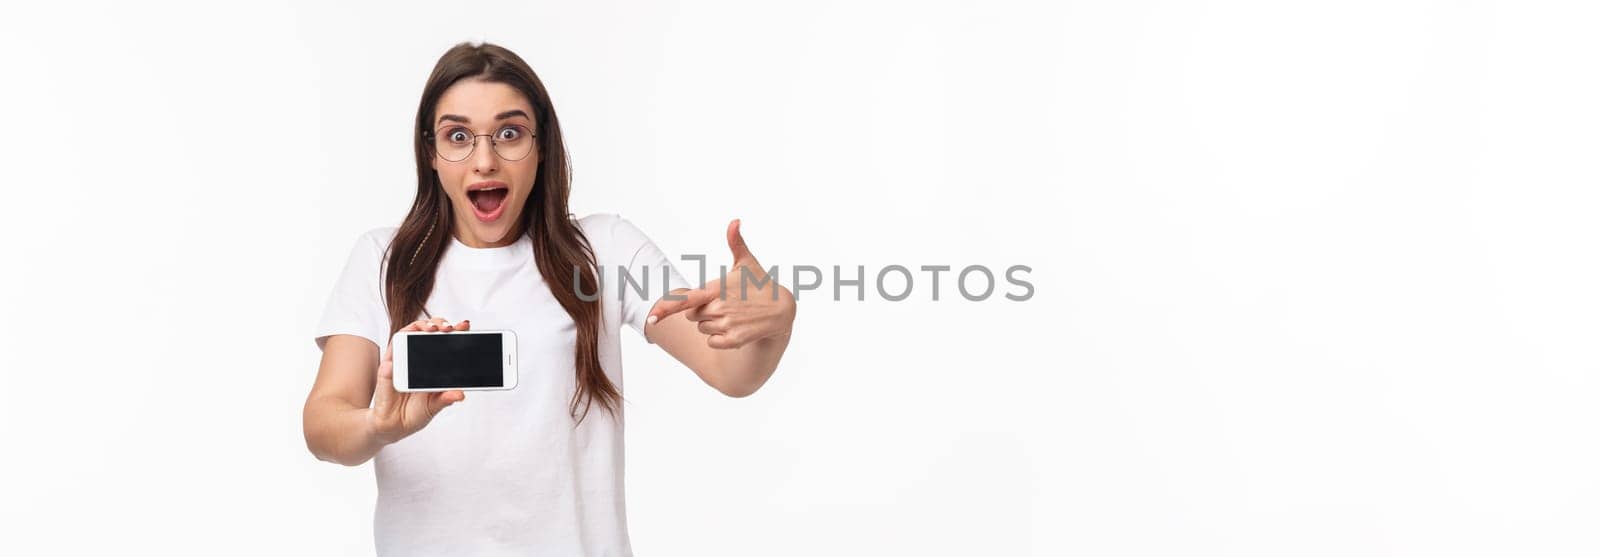 Communication, technology and lifestyle concept. Portrait of surprised and excited young woman in glasses hurry up with announcement of awesome new application, pointing at mobile phone.